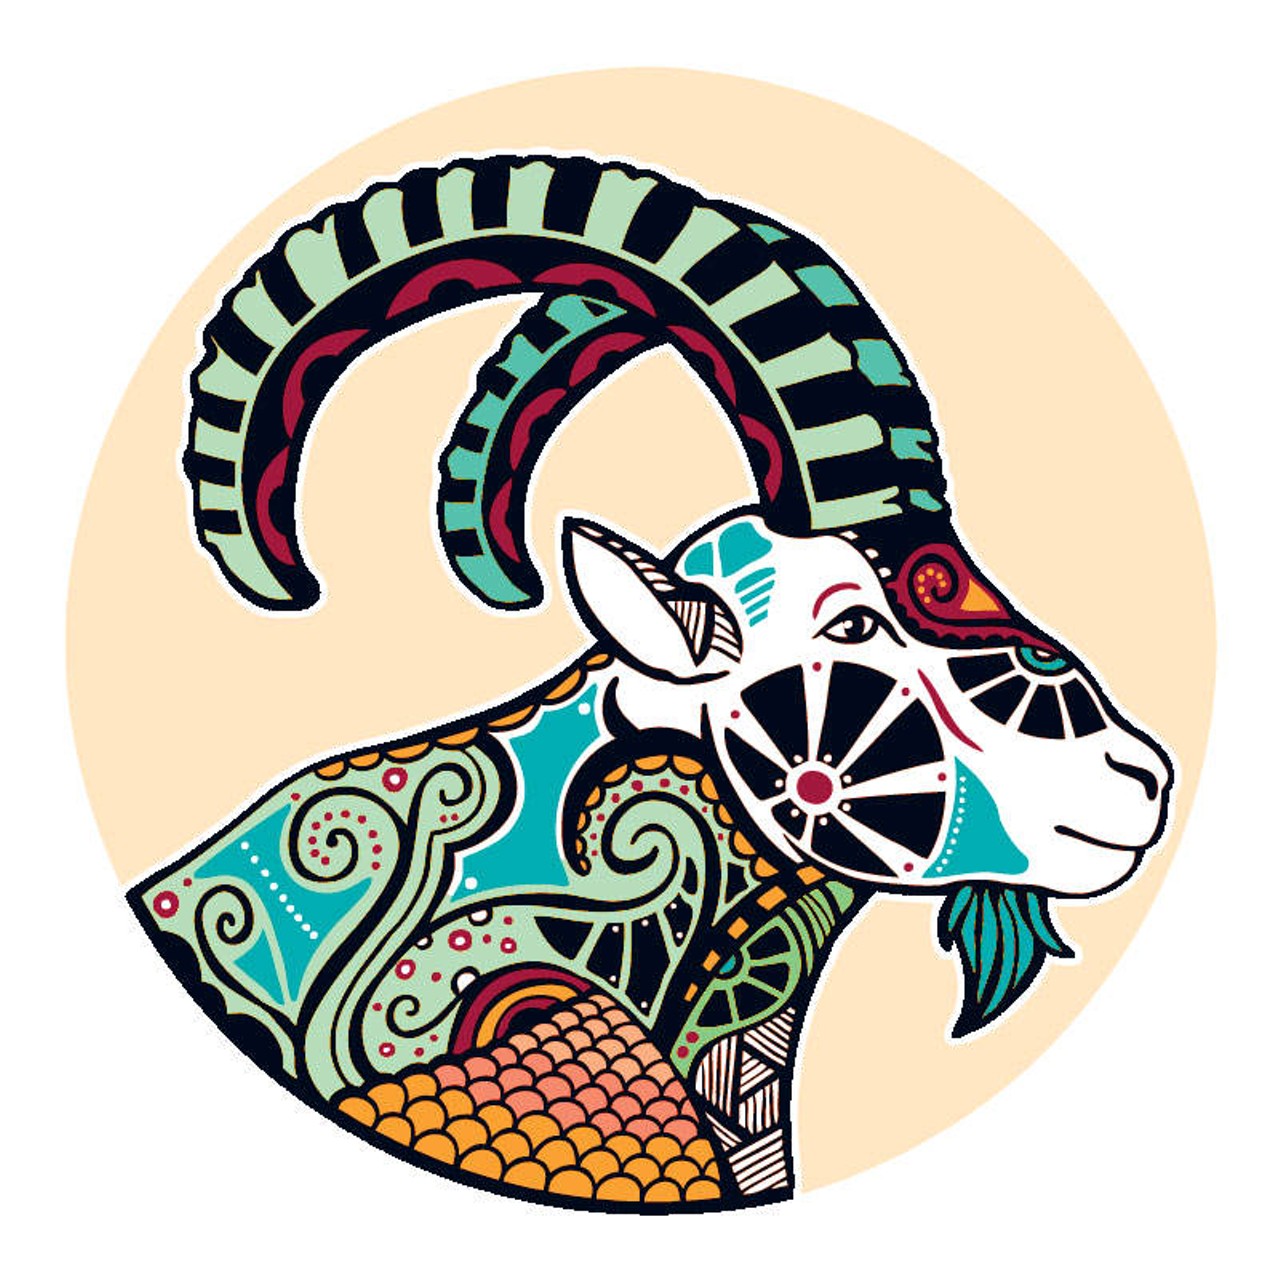 CAPRICORN (Dec. 21-Jan. 20): 
You keep pushing this rock up a hill. In some cases it&#146;s clear to me that persistence will pay off. In other cases? The stubborn adherence to goals that have nothing to justify the effort is just plain stupid. Those of you who have woken up inside, and are free of the lies that prevent all good things from coming to fruition, will be free and clear within one year. If you are in the stubborn category, and your denial mechanisms only serve to keep you convinced that you are right about things that have &#147;wrong&#148; written all over them, it&#146;s time to smarten up and change your ways.